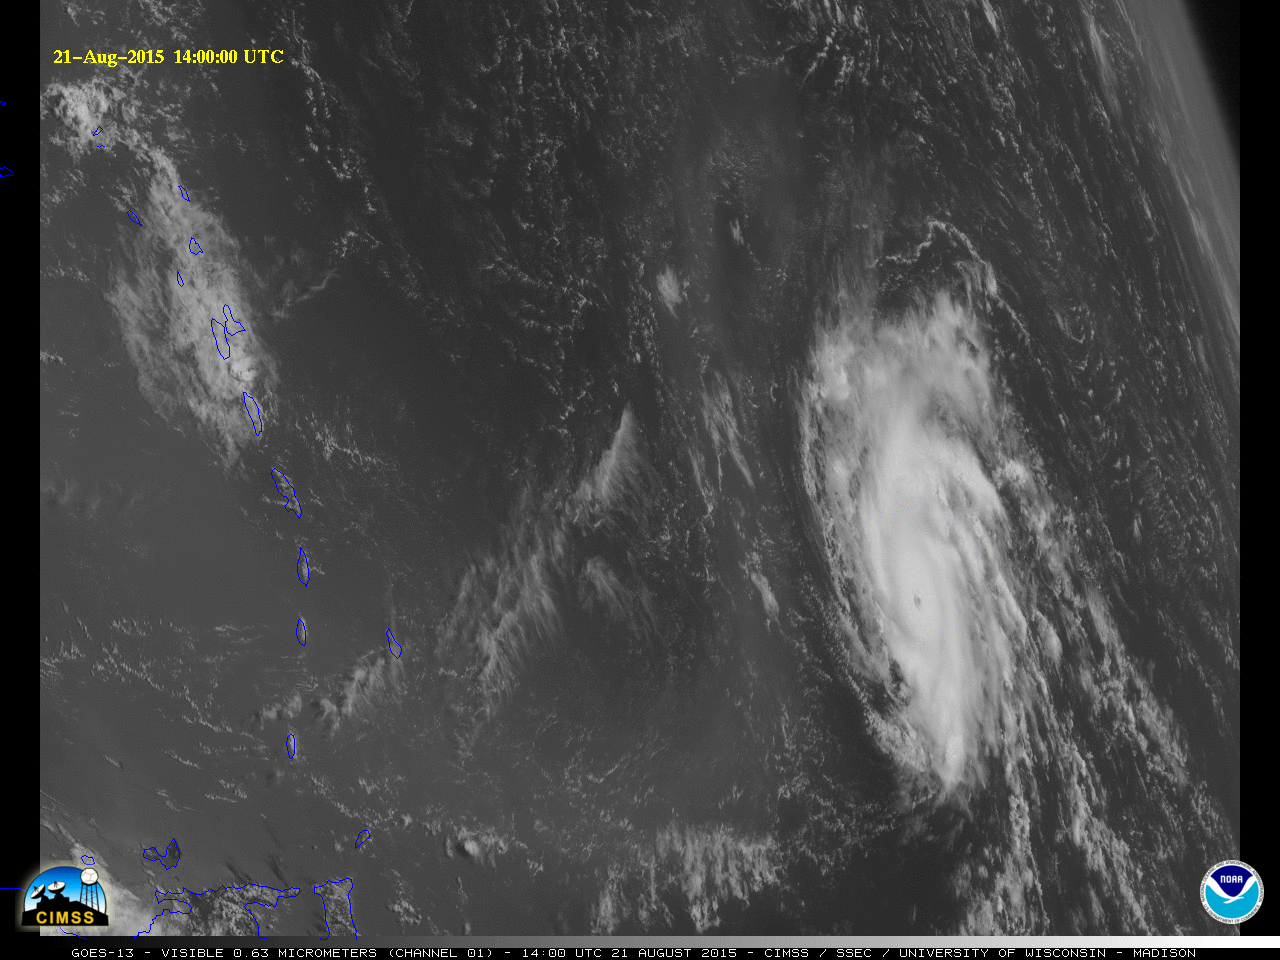 GOES-14 visible (0.63 um) images [click to play MP4 animation]